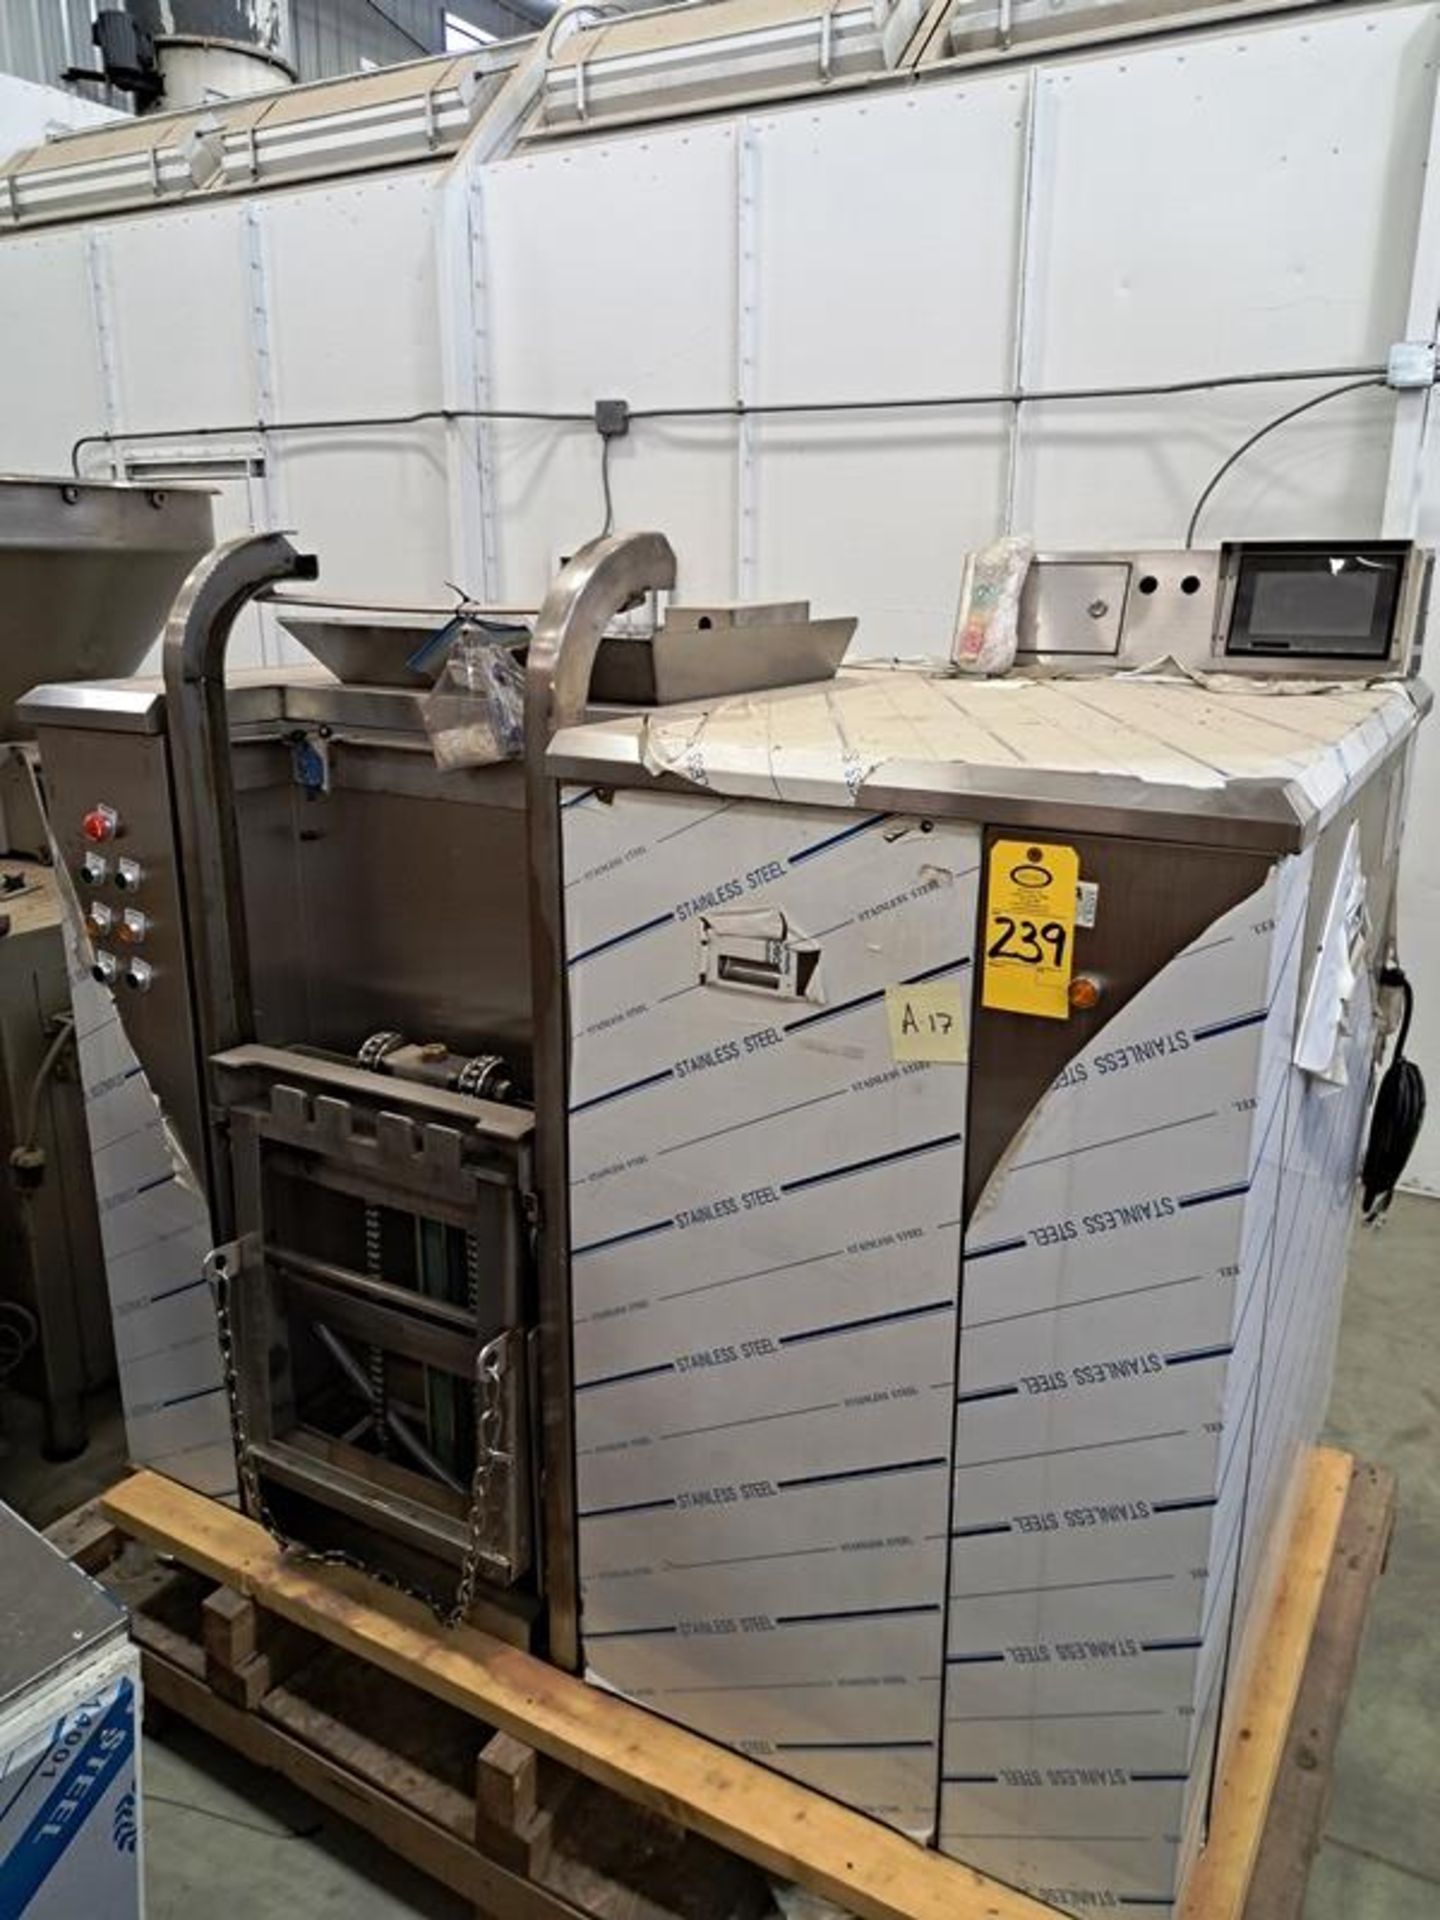 Ex Bio Mdl. EX300 Food Digester, Ser. #EA030002, 208 volts, 3 phase (Required Loading Fee: $25.00)